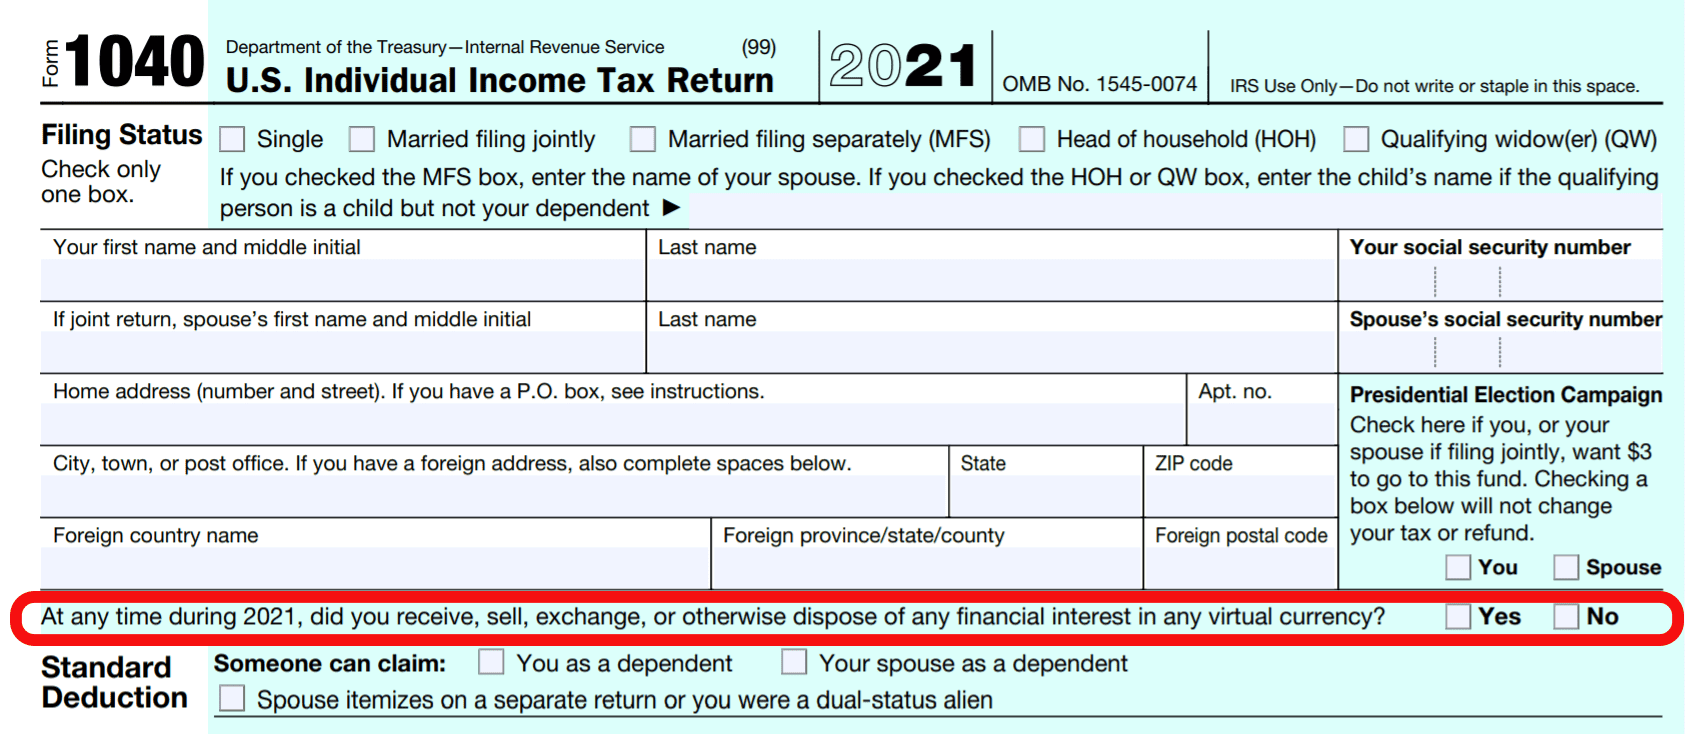 106989618-1639583897918-2021-tax-form.png